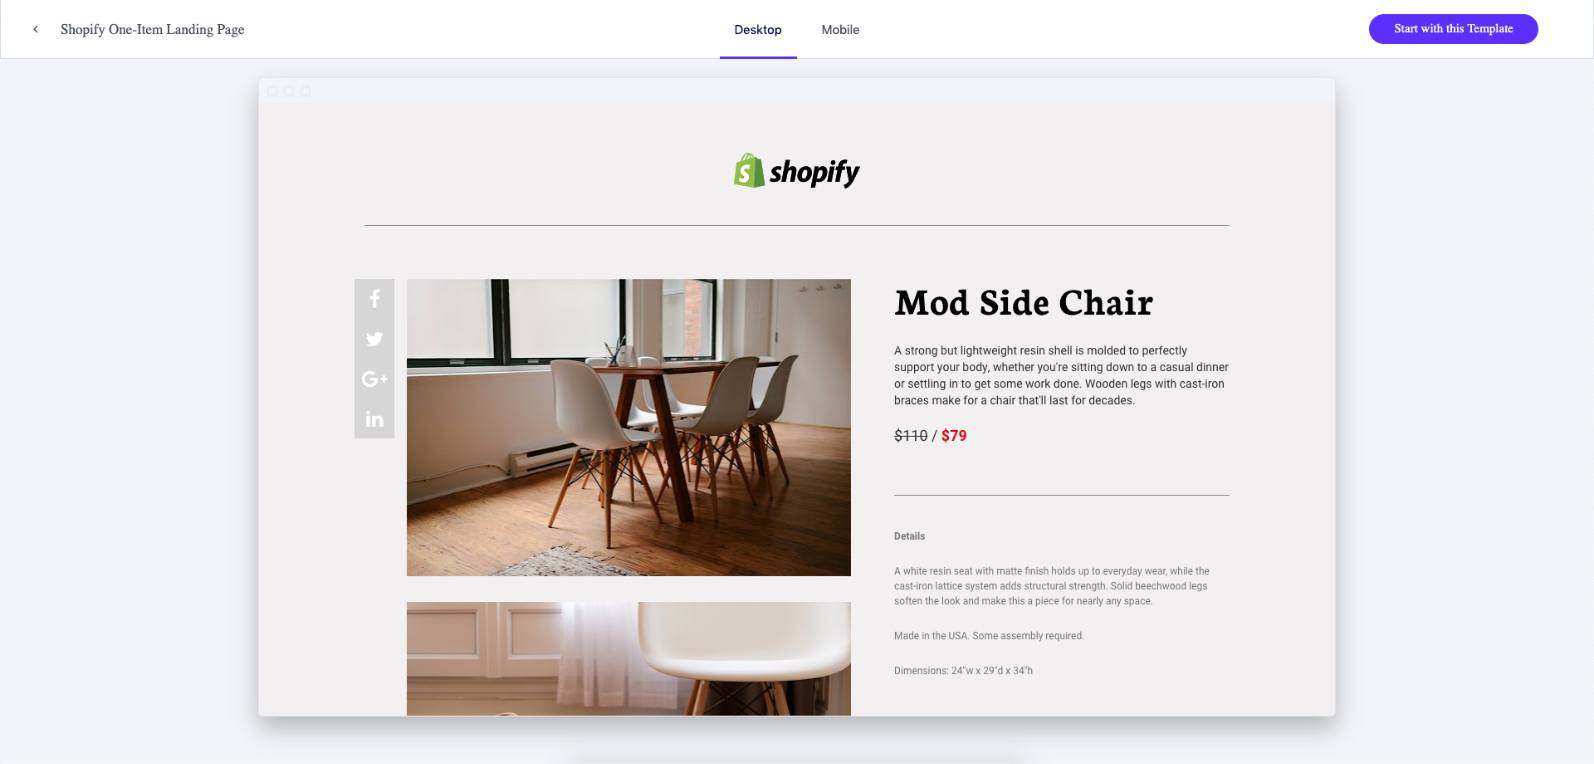 leadpages shopify landing page